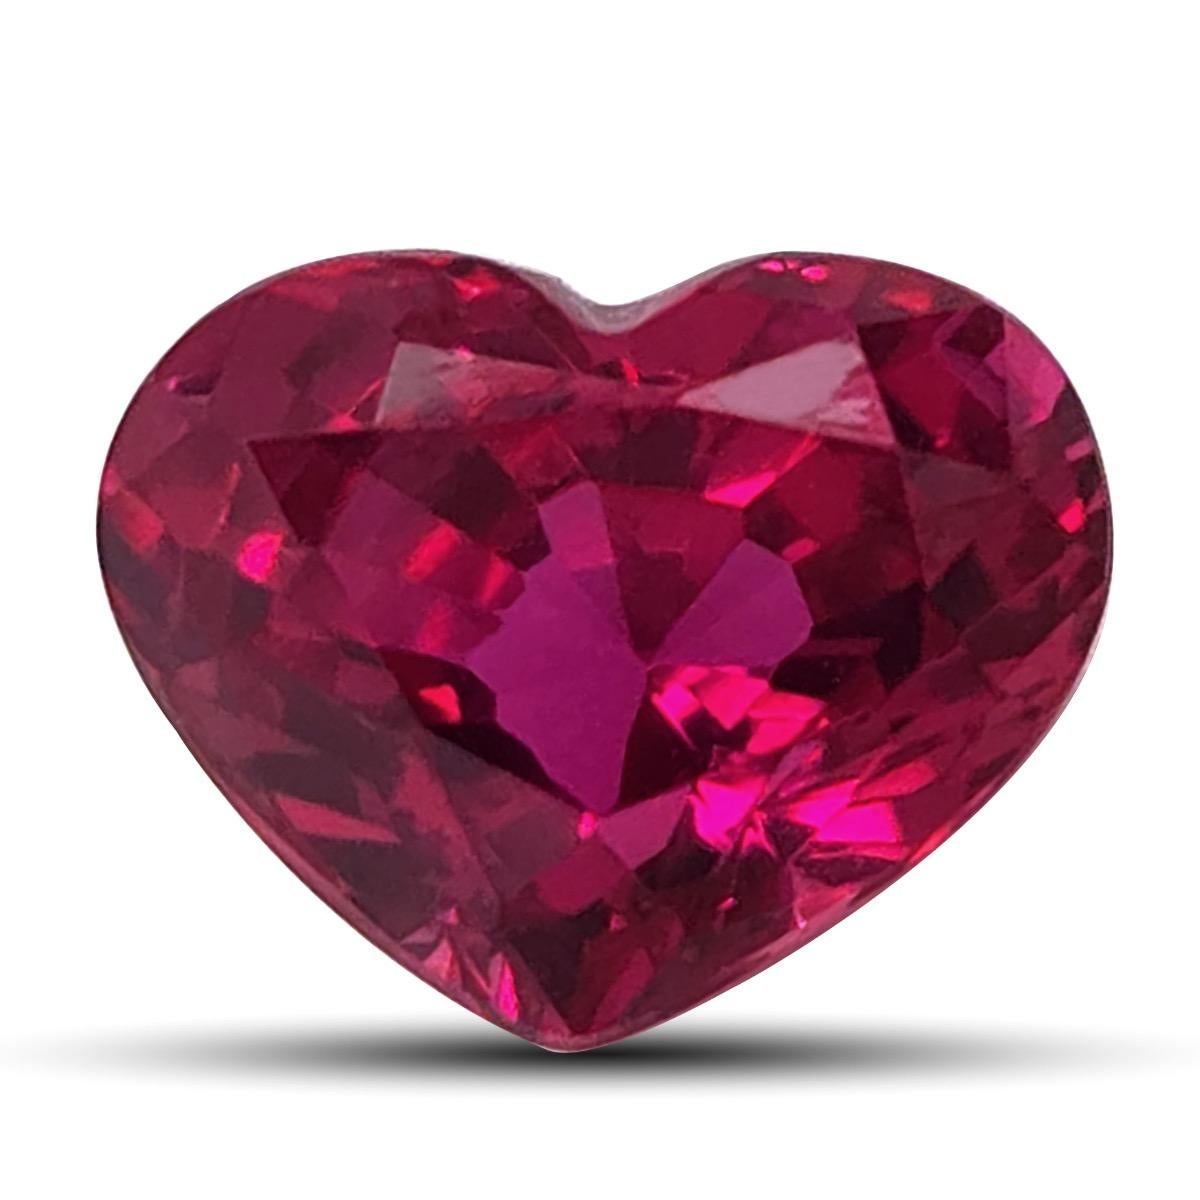 Women's or Men's GIA Certified 1.49 Carats Heated Mozambique Ruby For Sale